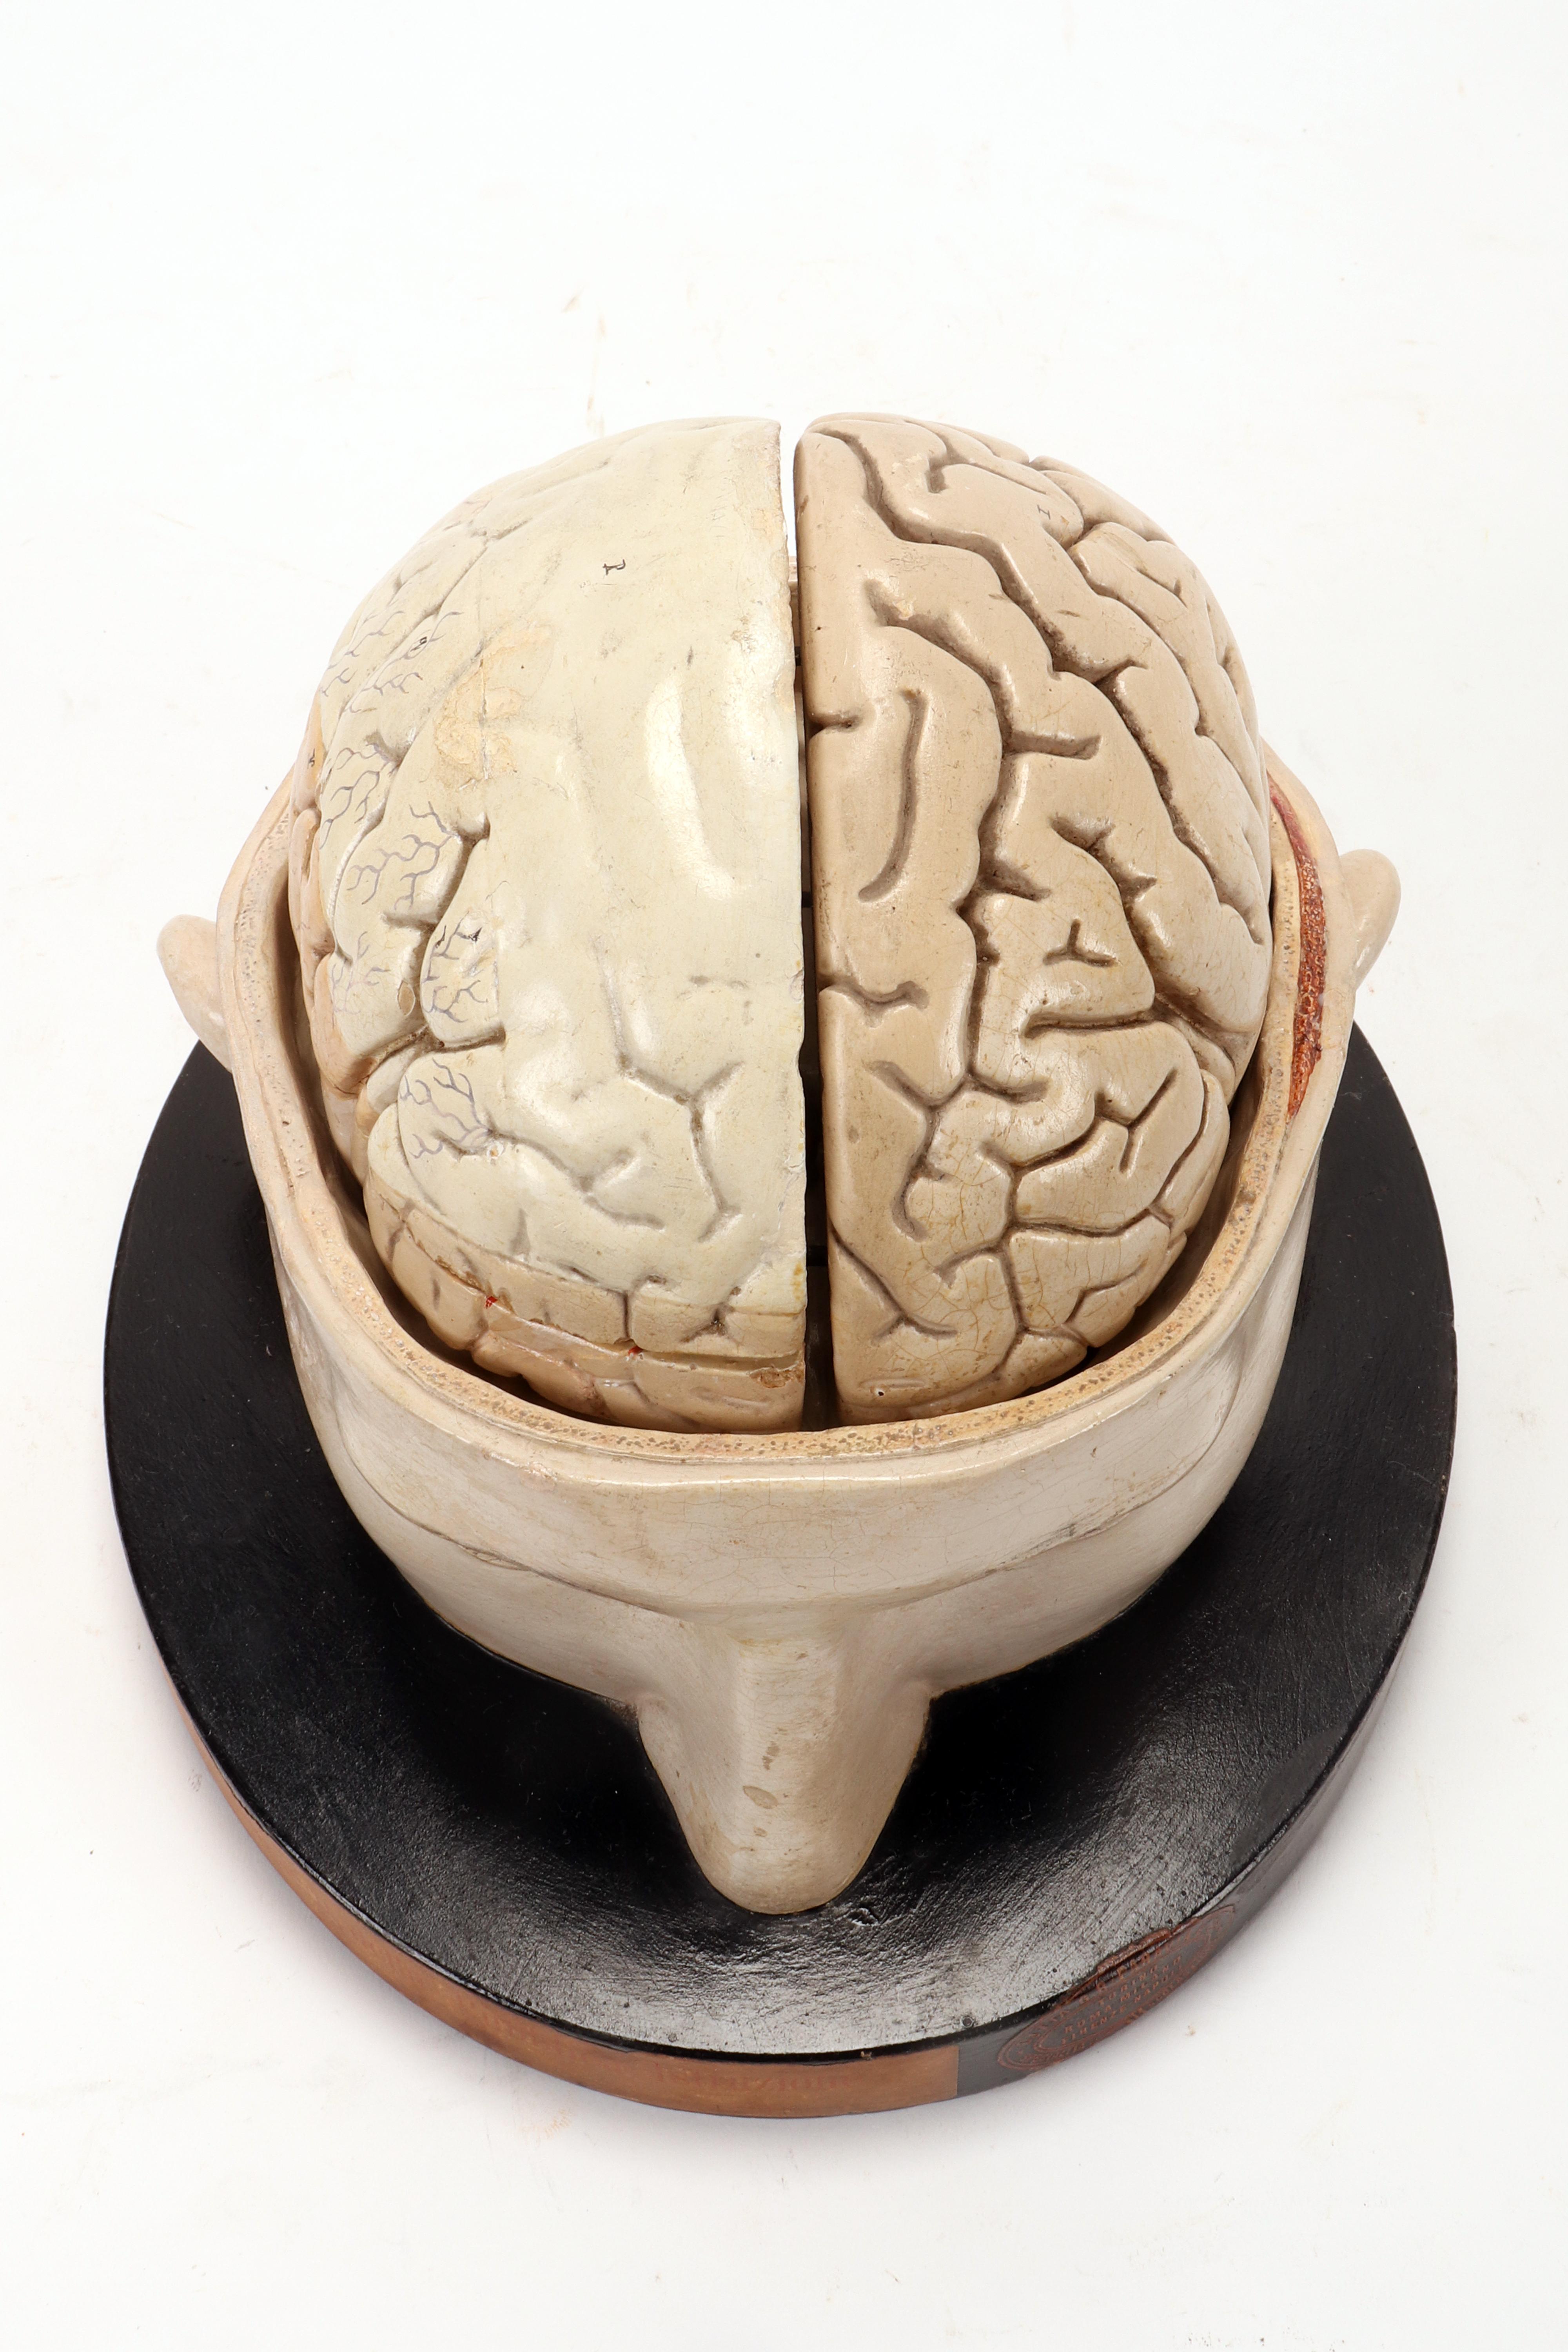 Anatomical model: a brain inserted into a sectioned skullcap, Italy 1920. 1